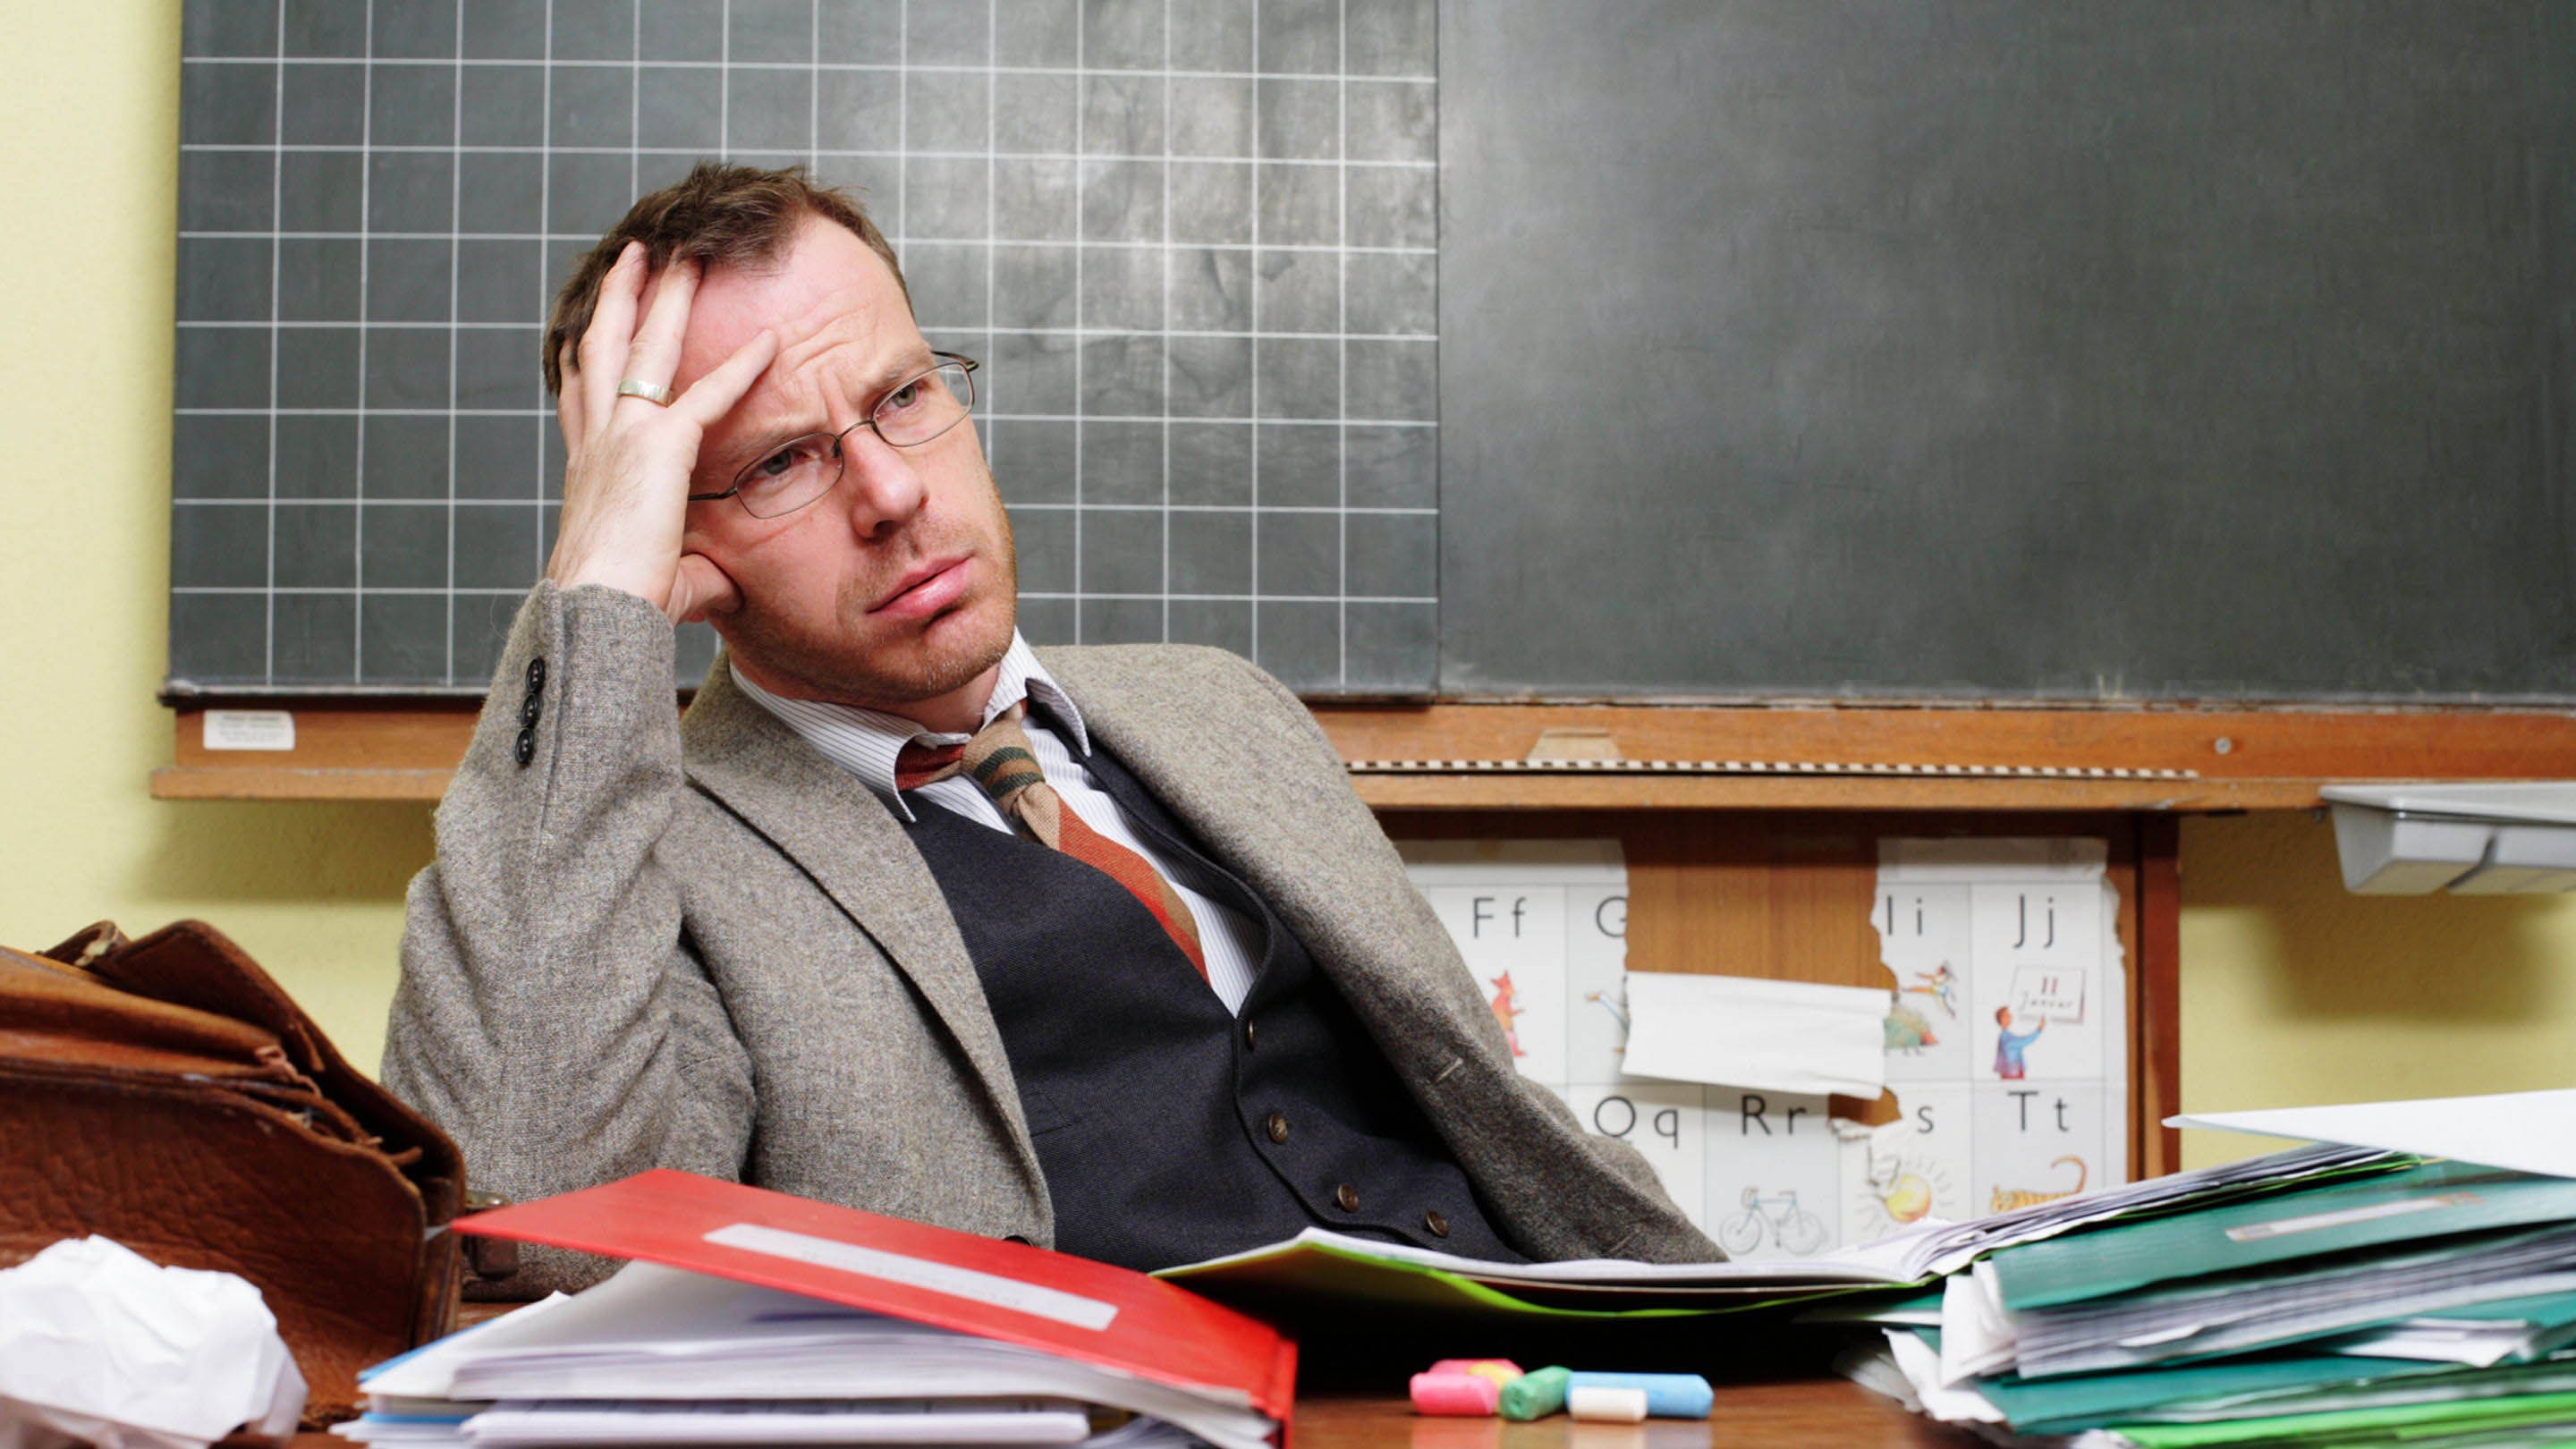 4 Powerful Mindsets for Turning Stress Into a Positive Force | Edutopia